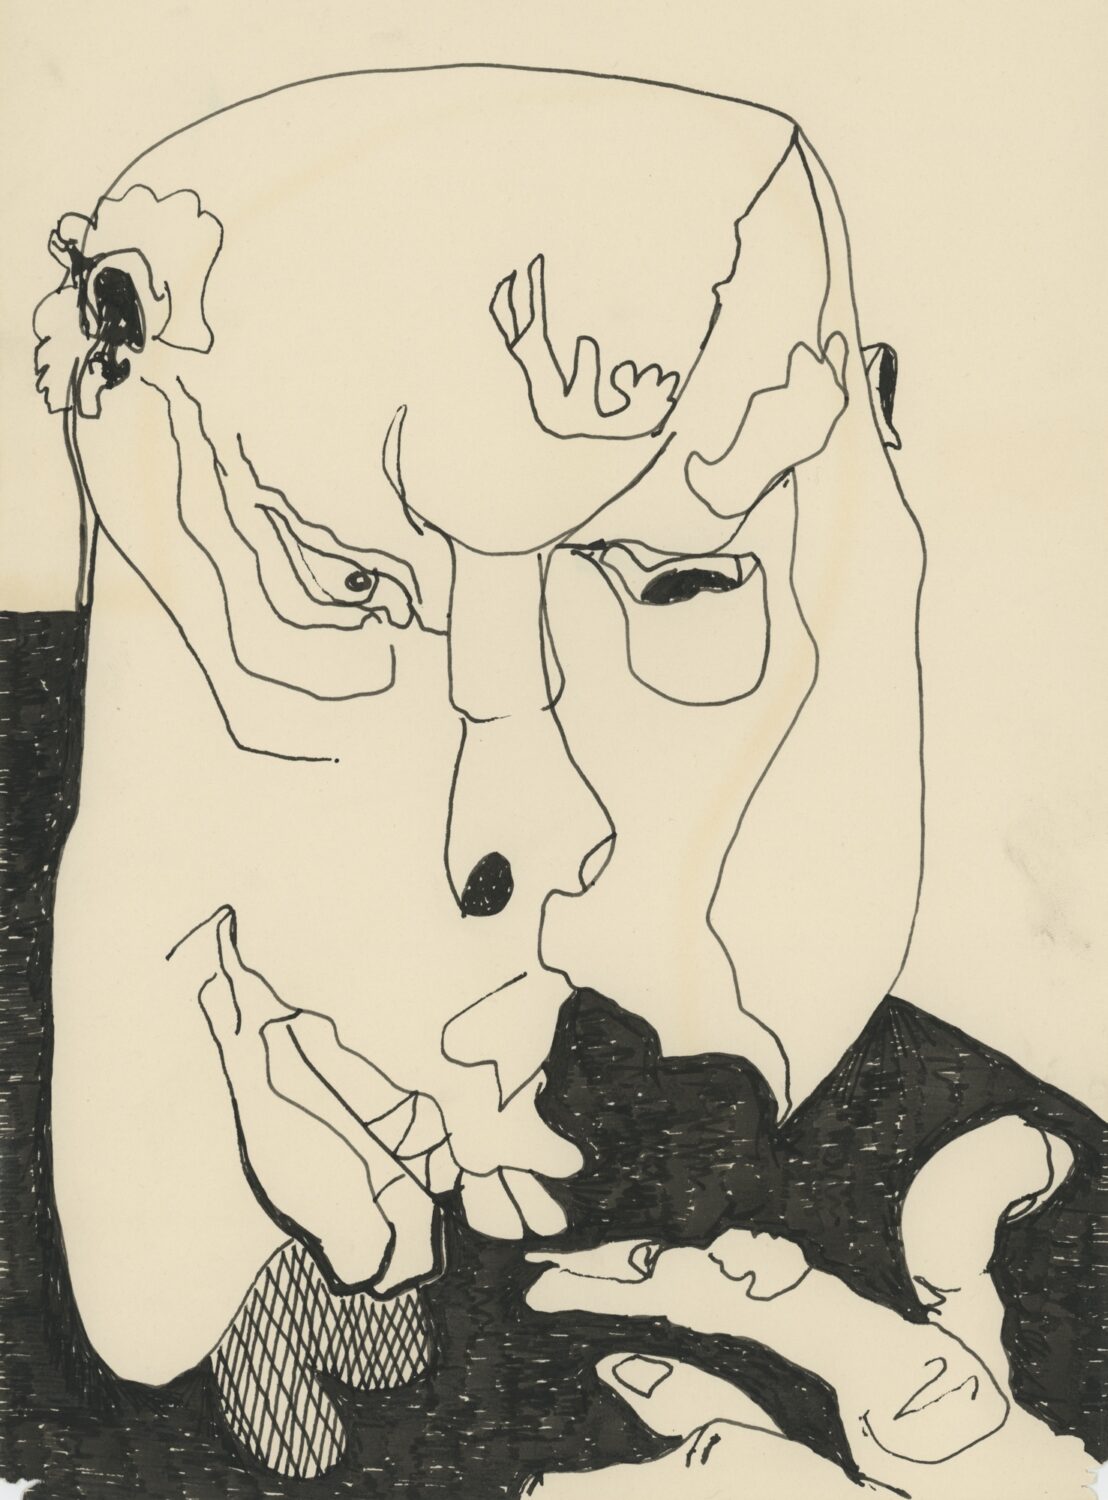 Abstract Man’s Face With Hand